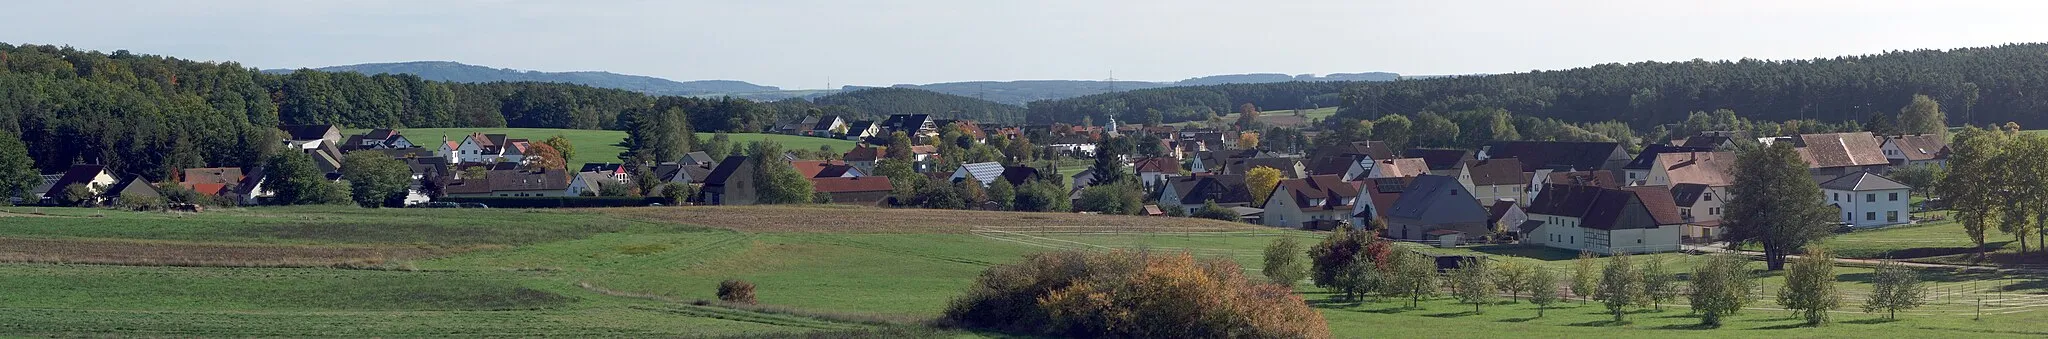 Photo showing: A panorama of Wimmelbach, a village of the town of Hausen near Forchheim in northern Bavaria. Obwerimmelbach can be seen in the front, while Unterwimmelbach is further back.